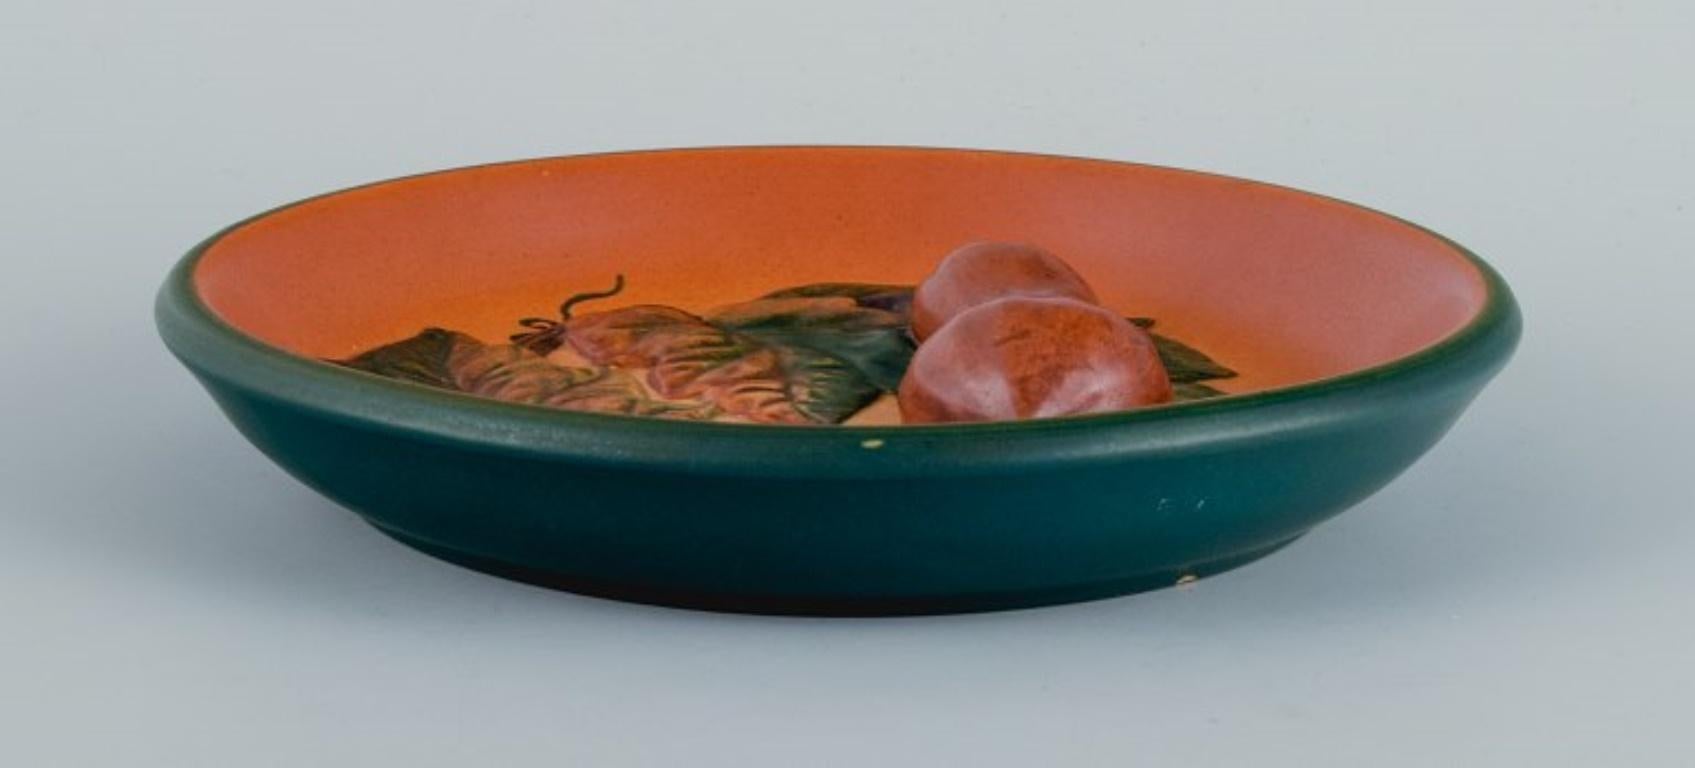 Ipsen's, Denmark. 
Ceramic bowl with leaves and pumpkins, glaze in shades of orange-green.
Model 8.
1920s-1930s.
In excellent condition.
Marked
Dimensions: D 17.0 x H 3.0 cm.